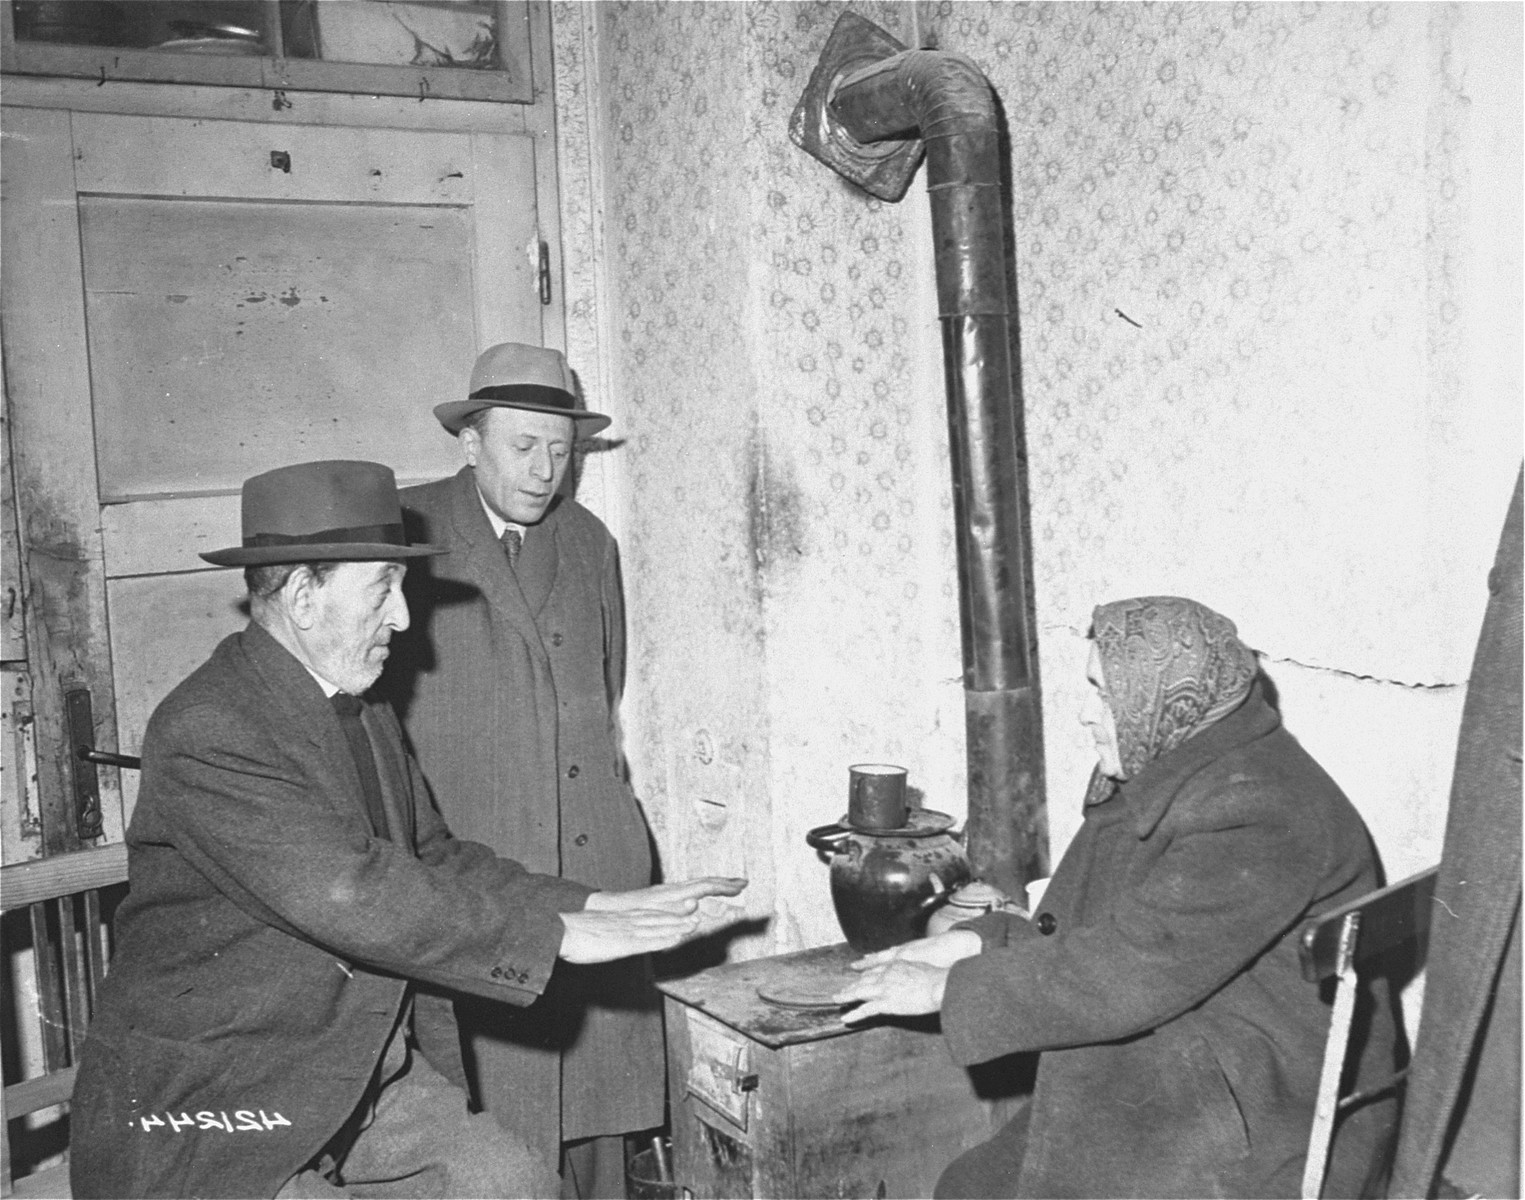 A Jewish DP family huddles around the stove which is used for heating and cooking at the Jewish DP camp located at Hallein, 15 miles from Salzburg.